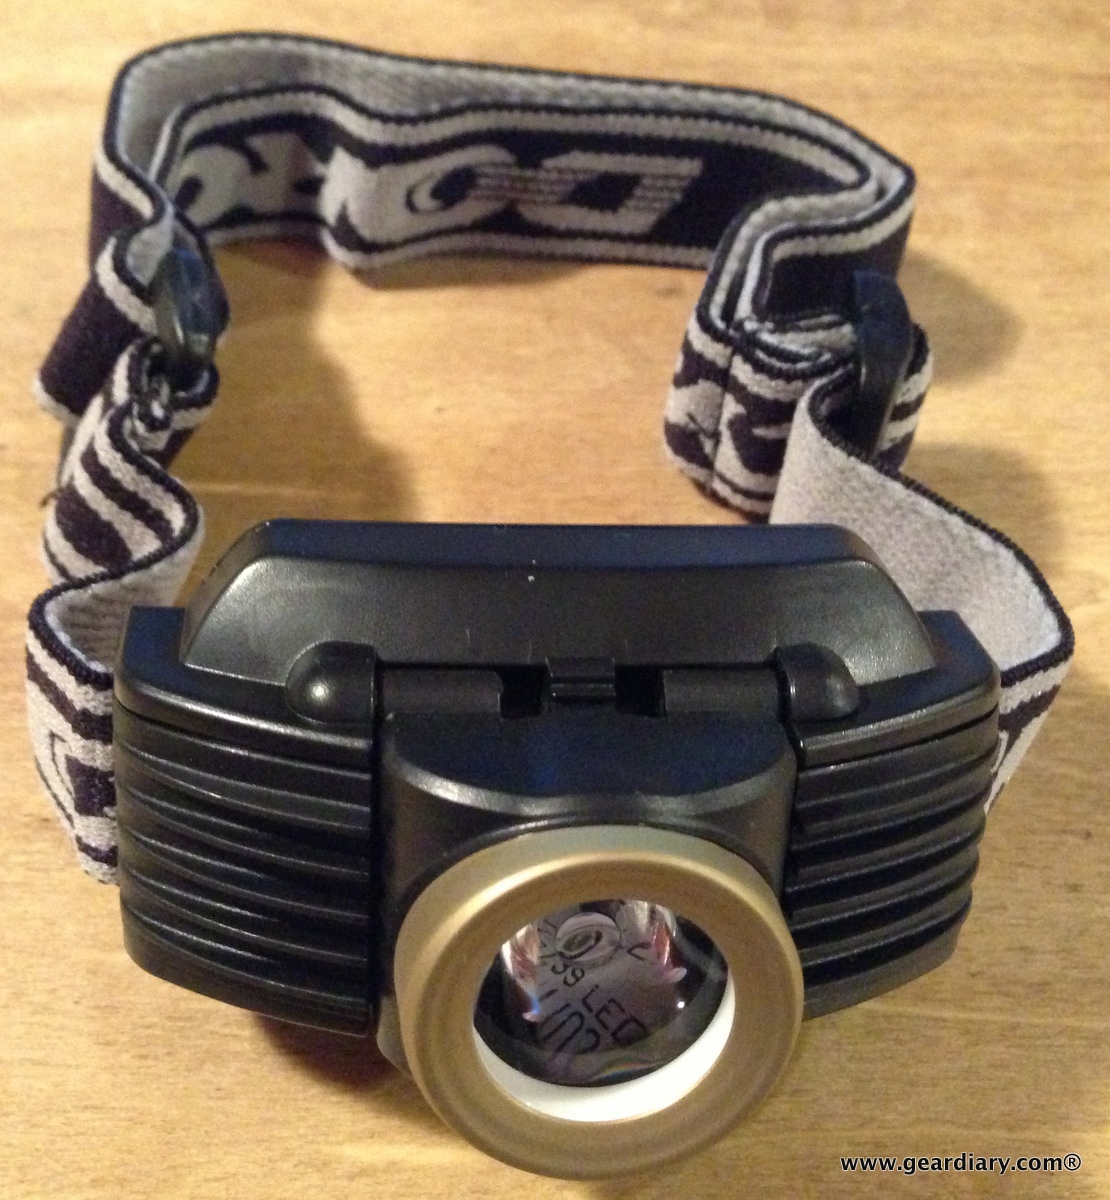 Dorcy LED Headlamp Review